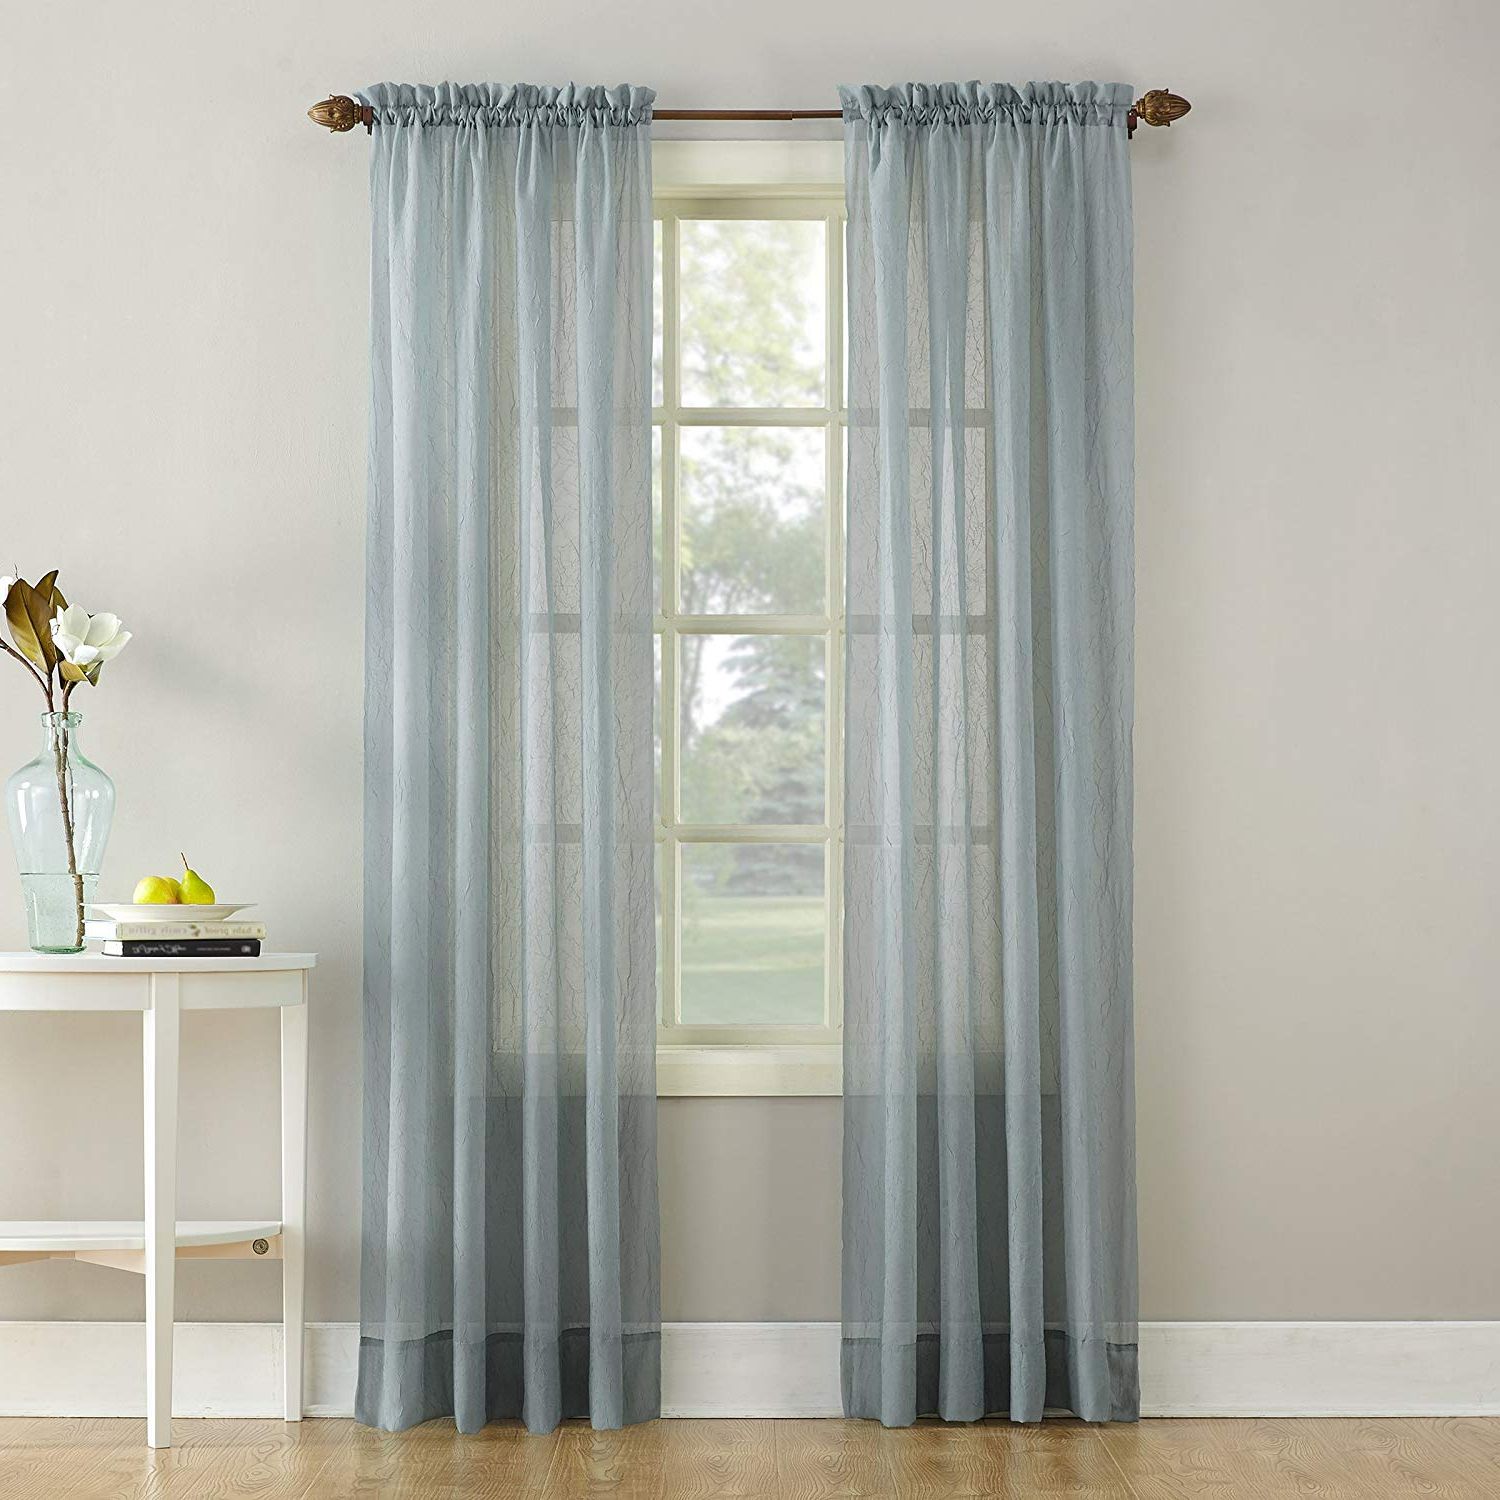 Newest Erica Sheer Crushed Voile Single Curtain Panels With Regard To No (View 1 of 20)